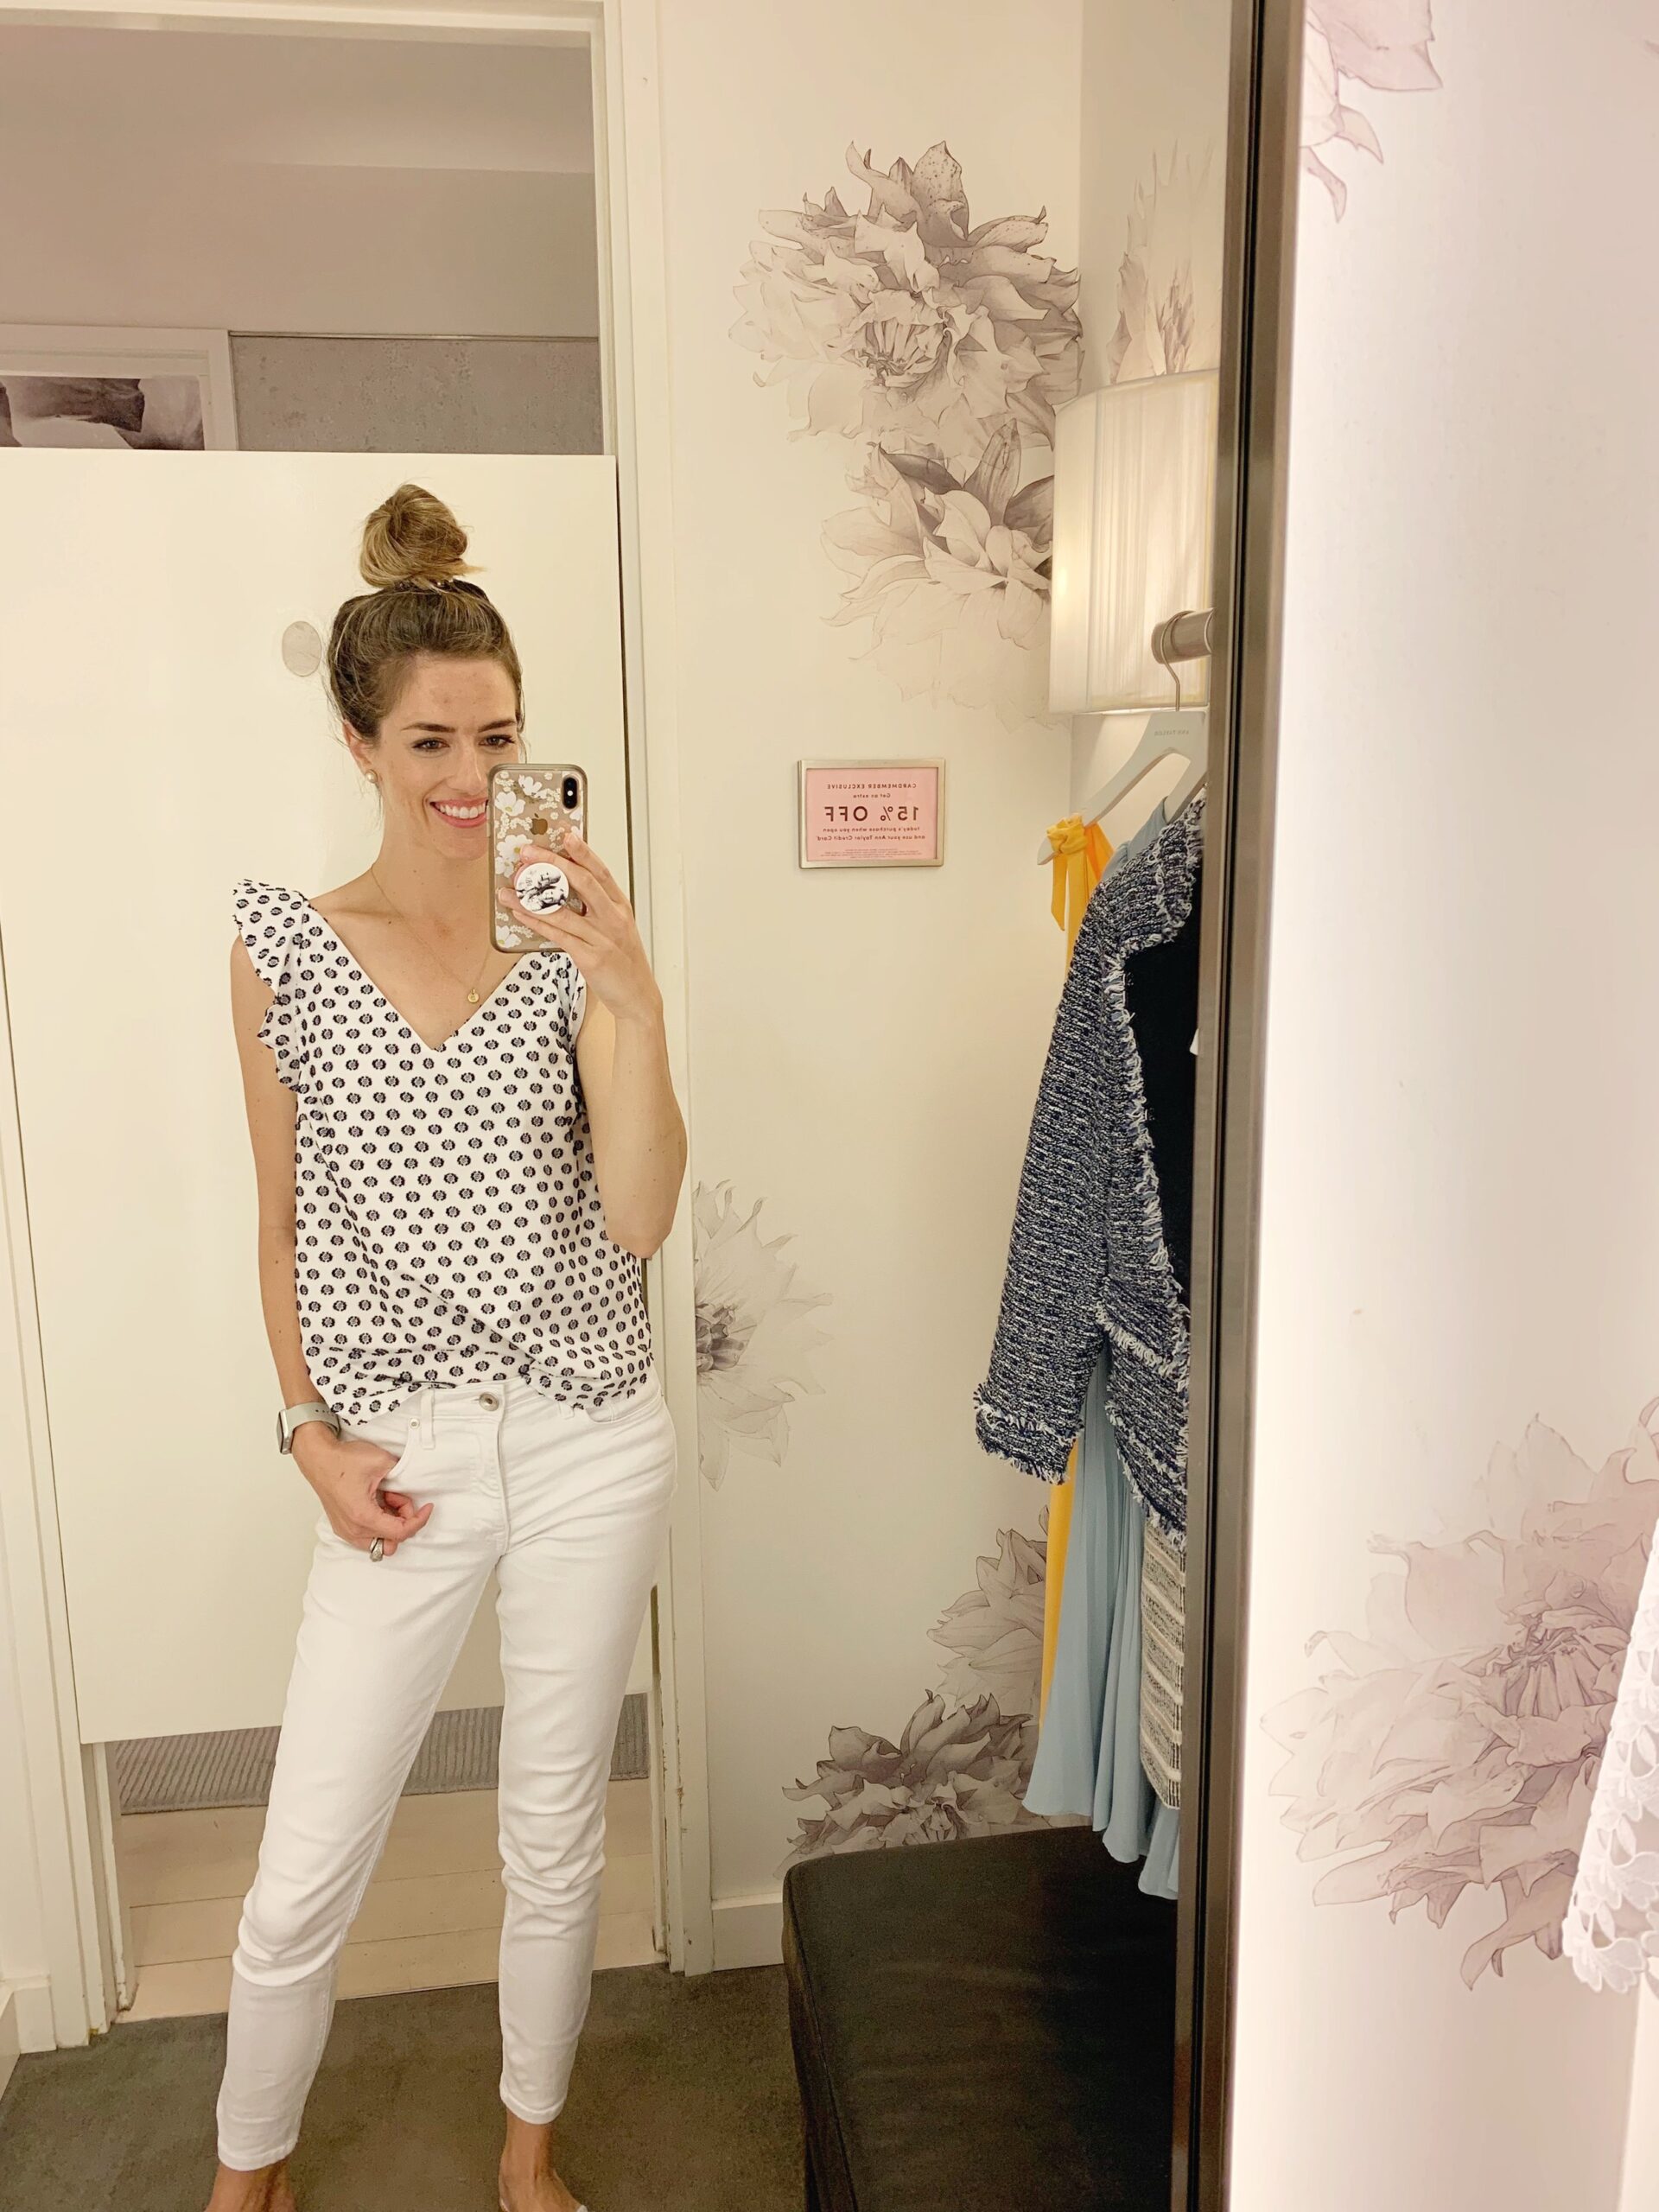 Really liked this top. Its a nice thick material and the dots are textured/raised making it feel like a high quality top. It runs TTS and would look great paired with a chino short, too. Price is $59 plus the additional 50%/60%/70% off depending on …